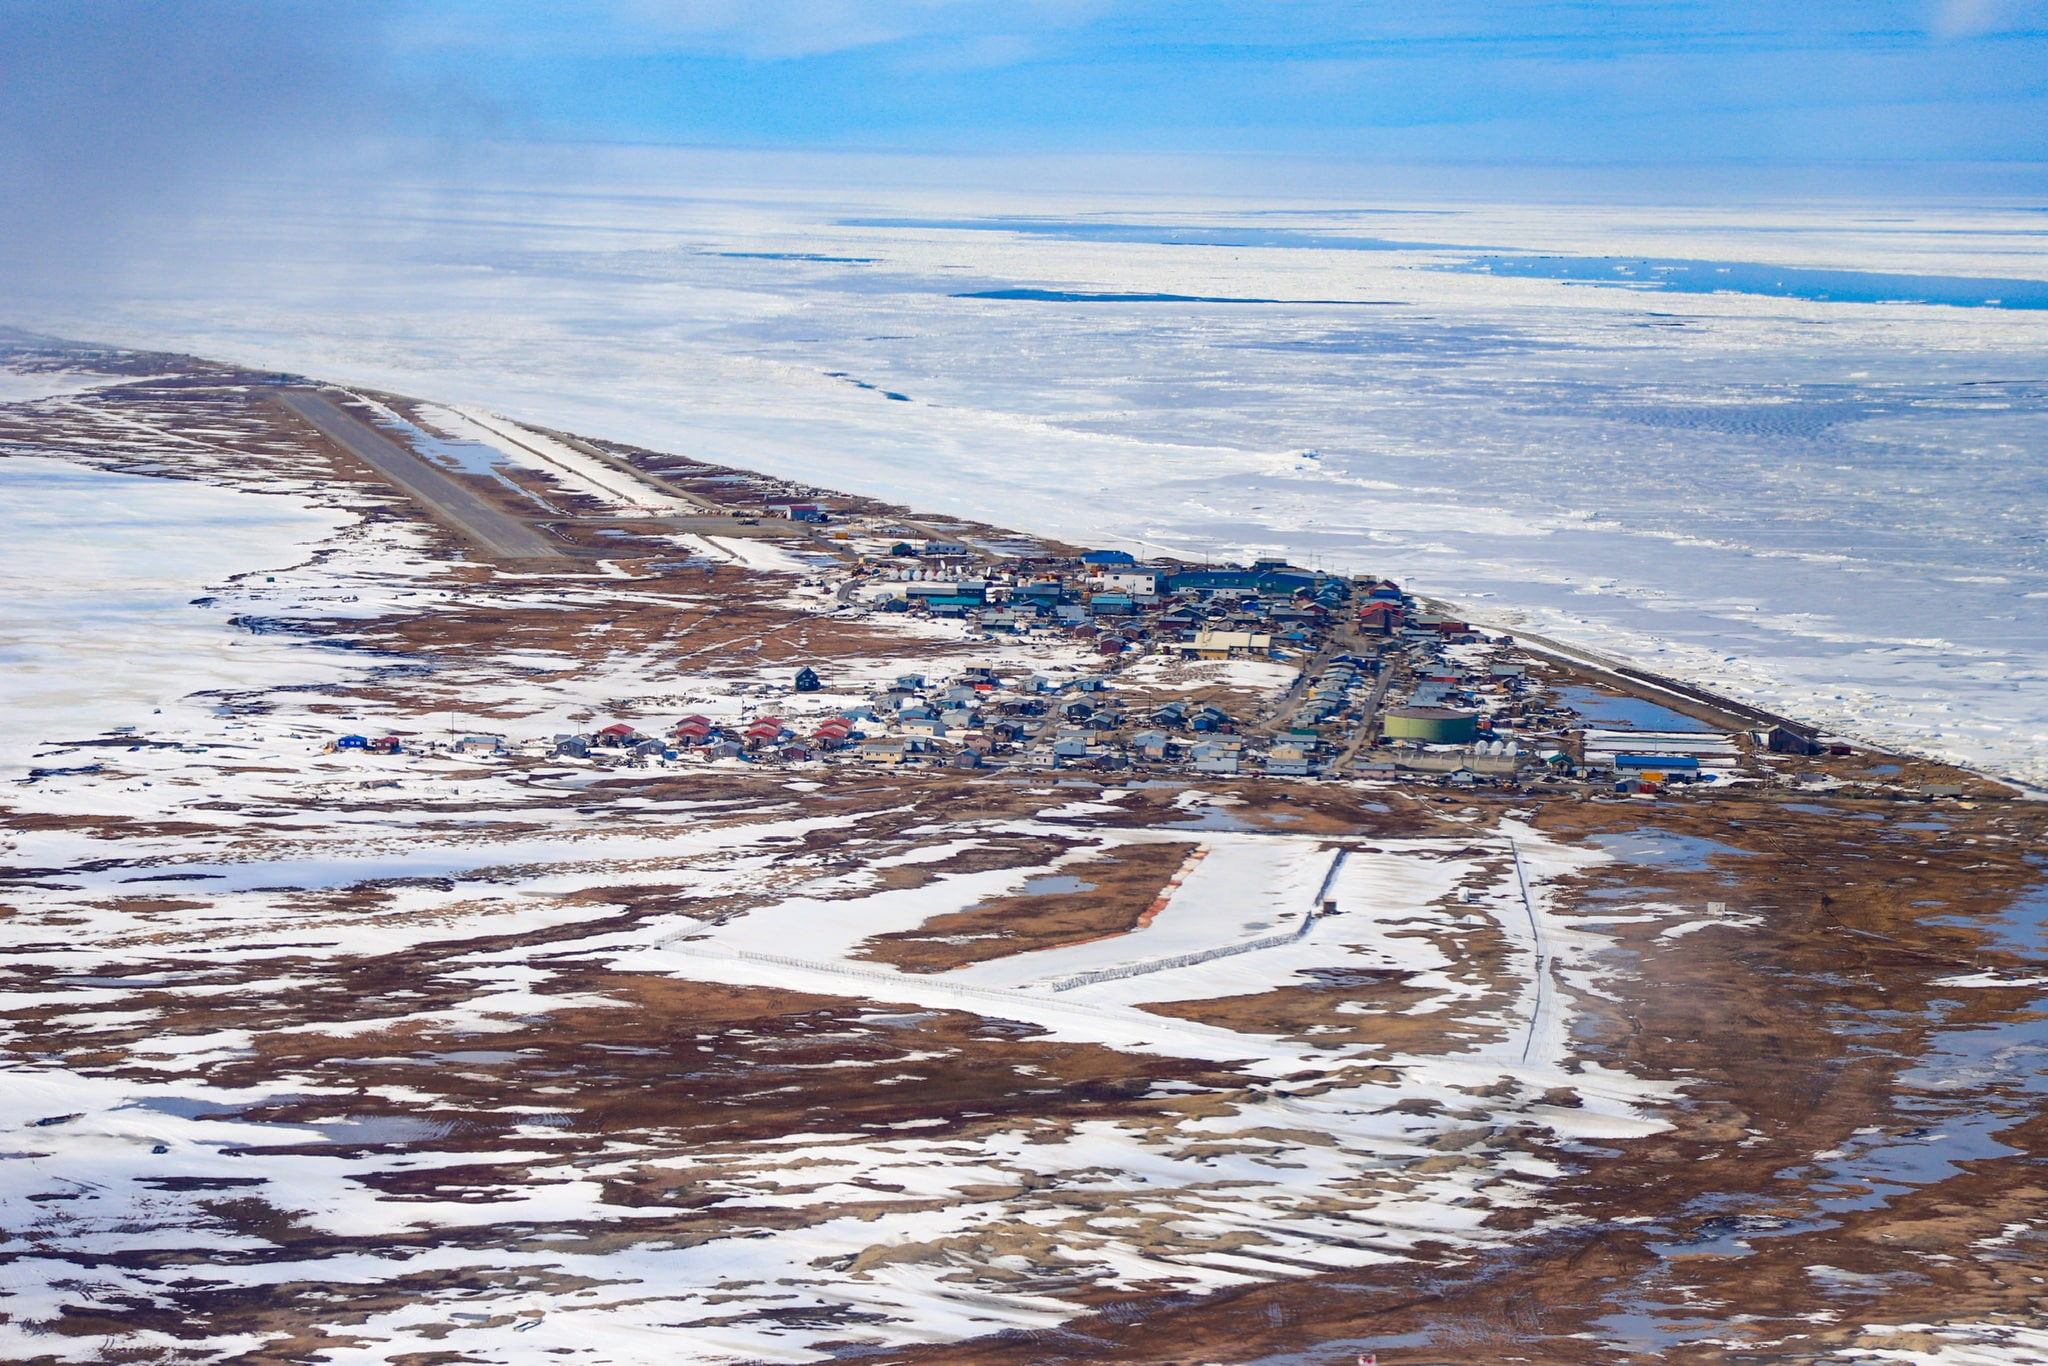 Aerial view of a town with patches of snow on the ground.